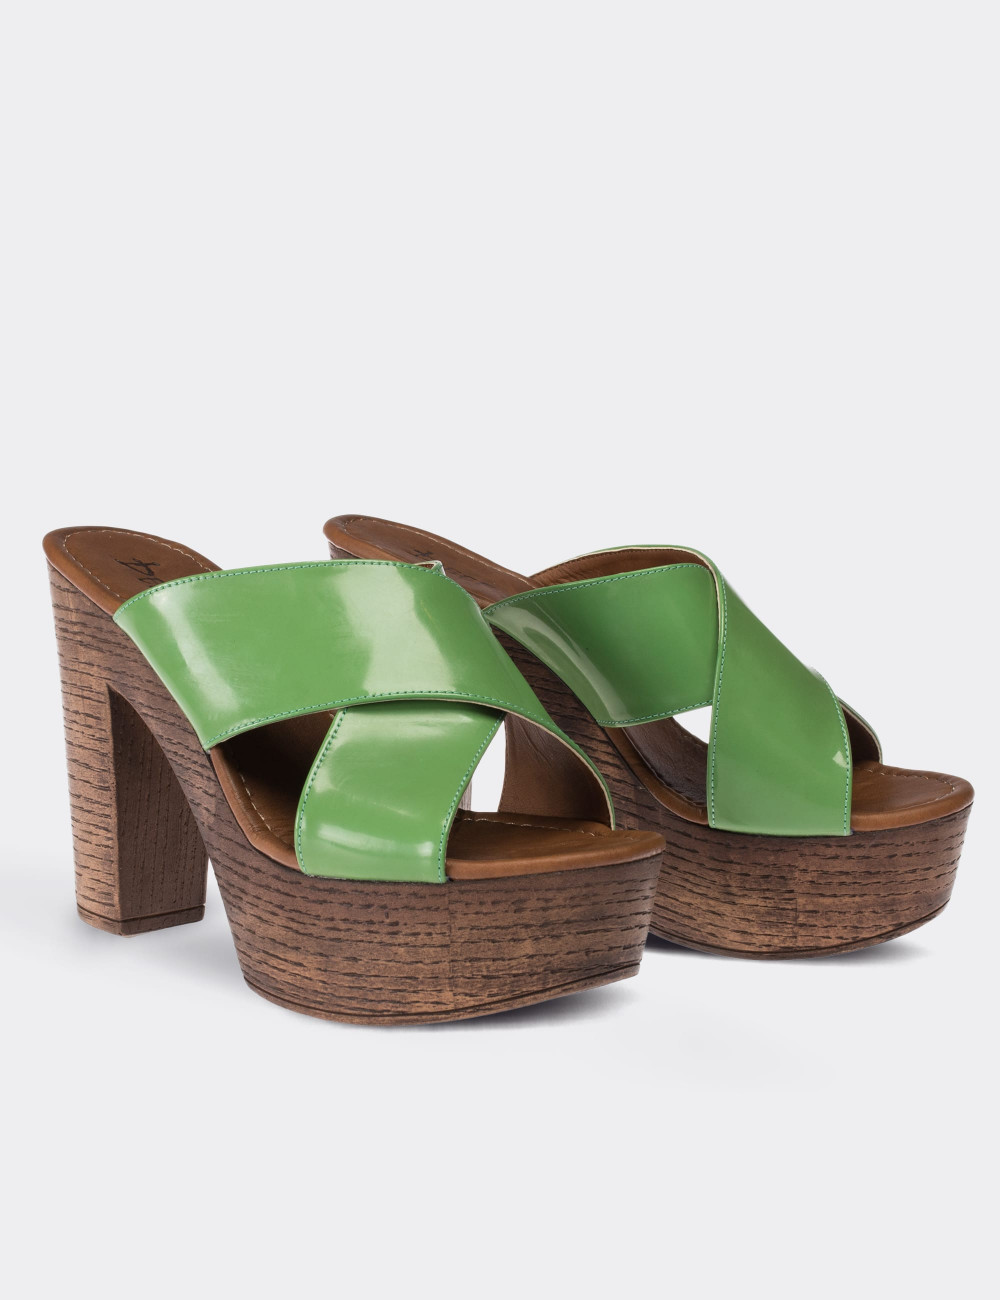 Green  Leather Wedge Sandals - 02050ZYSLC01